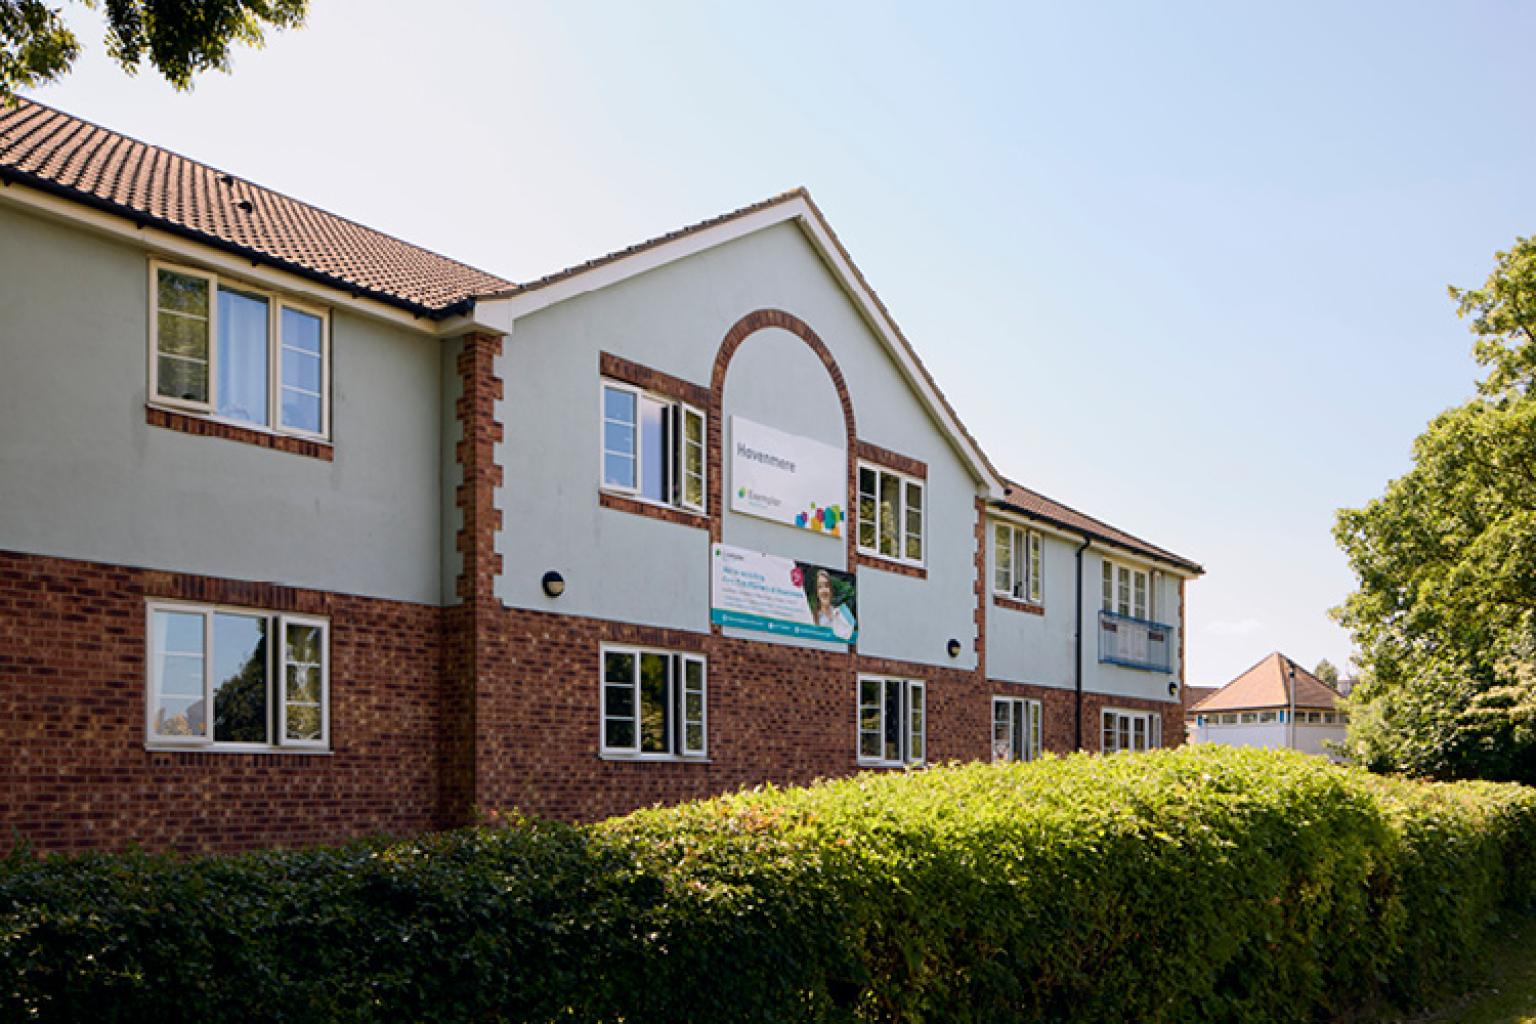 Exterior of Havenmere care home